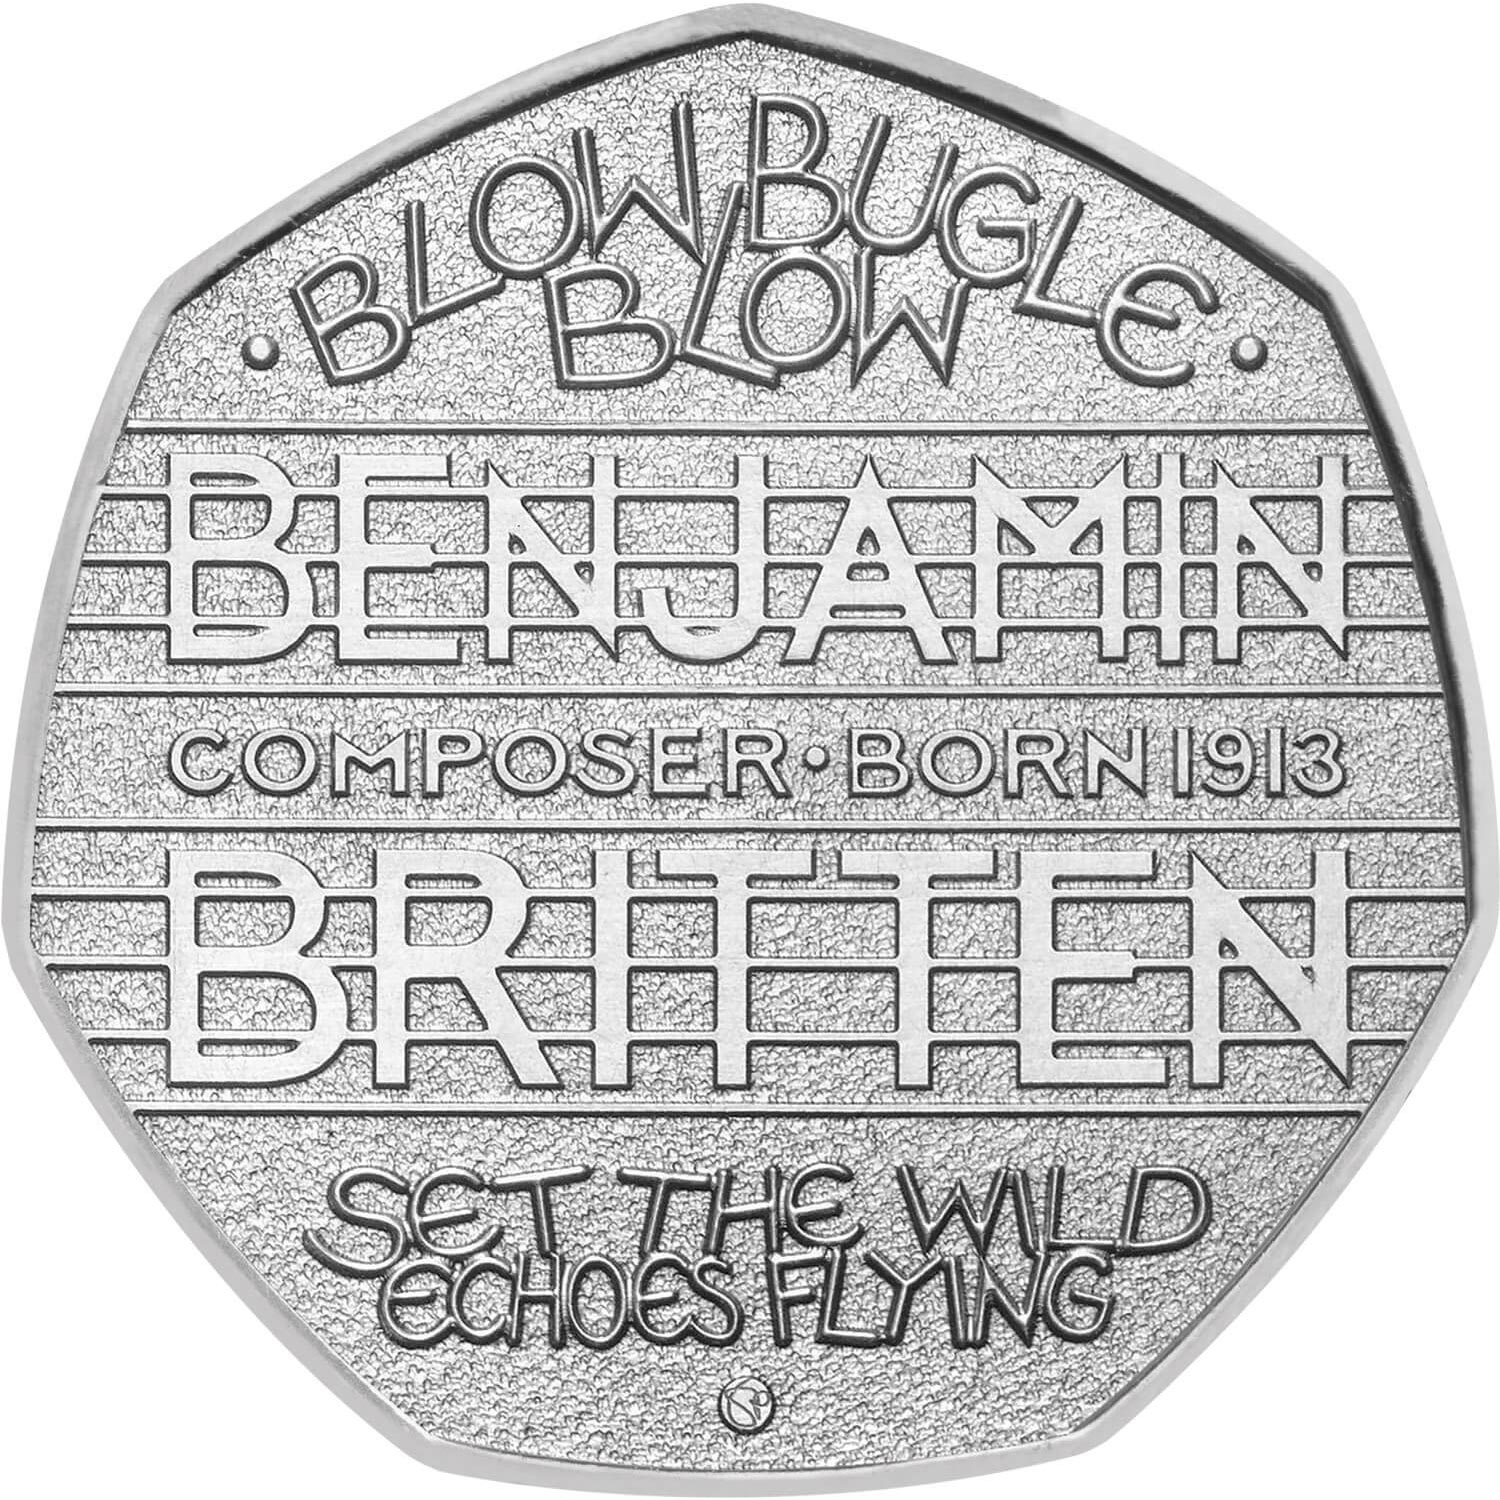 Image of 50 pence coin - The 100th Anniversary of the Birth of Benjamin Britten | United Kingdom 2013.  The Copper–Nickel (CuNi) coin is of UNC quality.